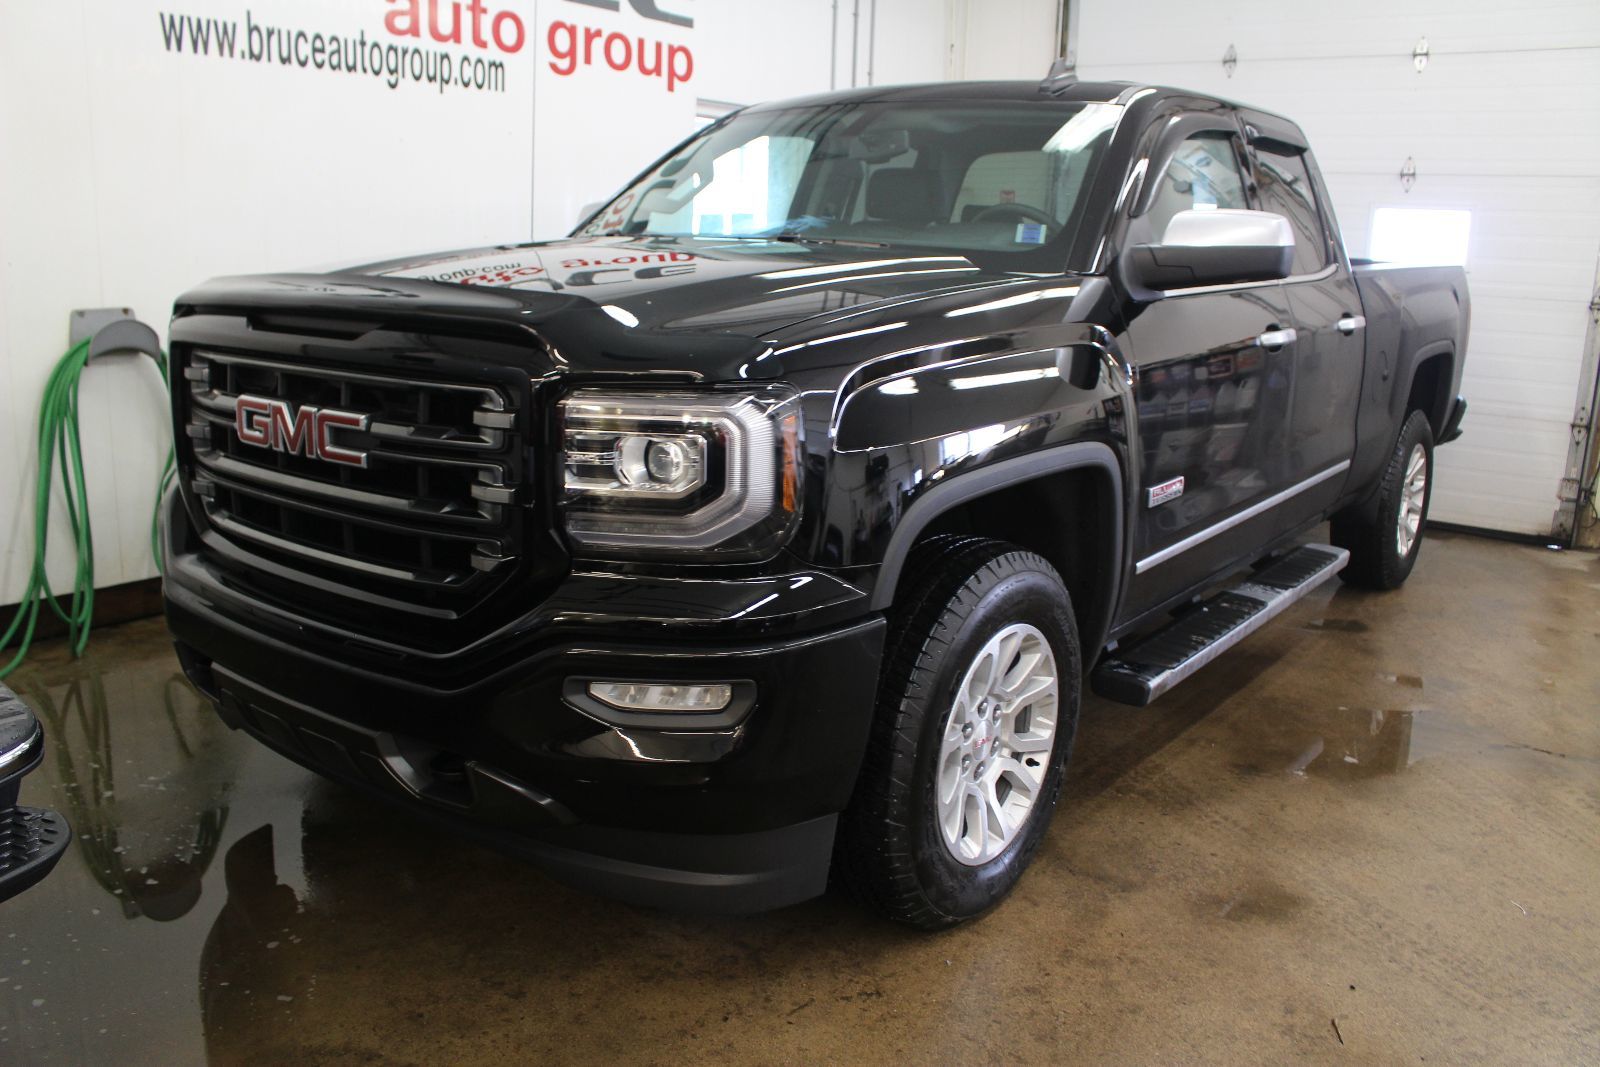 New 2016 GMC Sierra 1500 SLE 5.3L 8 CYL ECOTEC AUTO. 4X4 SHORTBOX EXT. CAB for Sale in Middleton ...